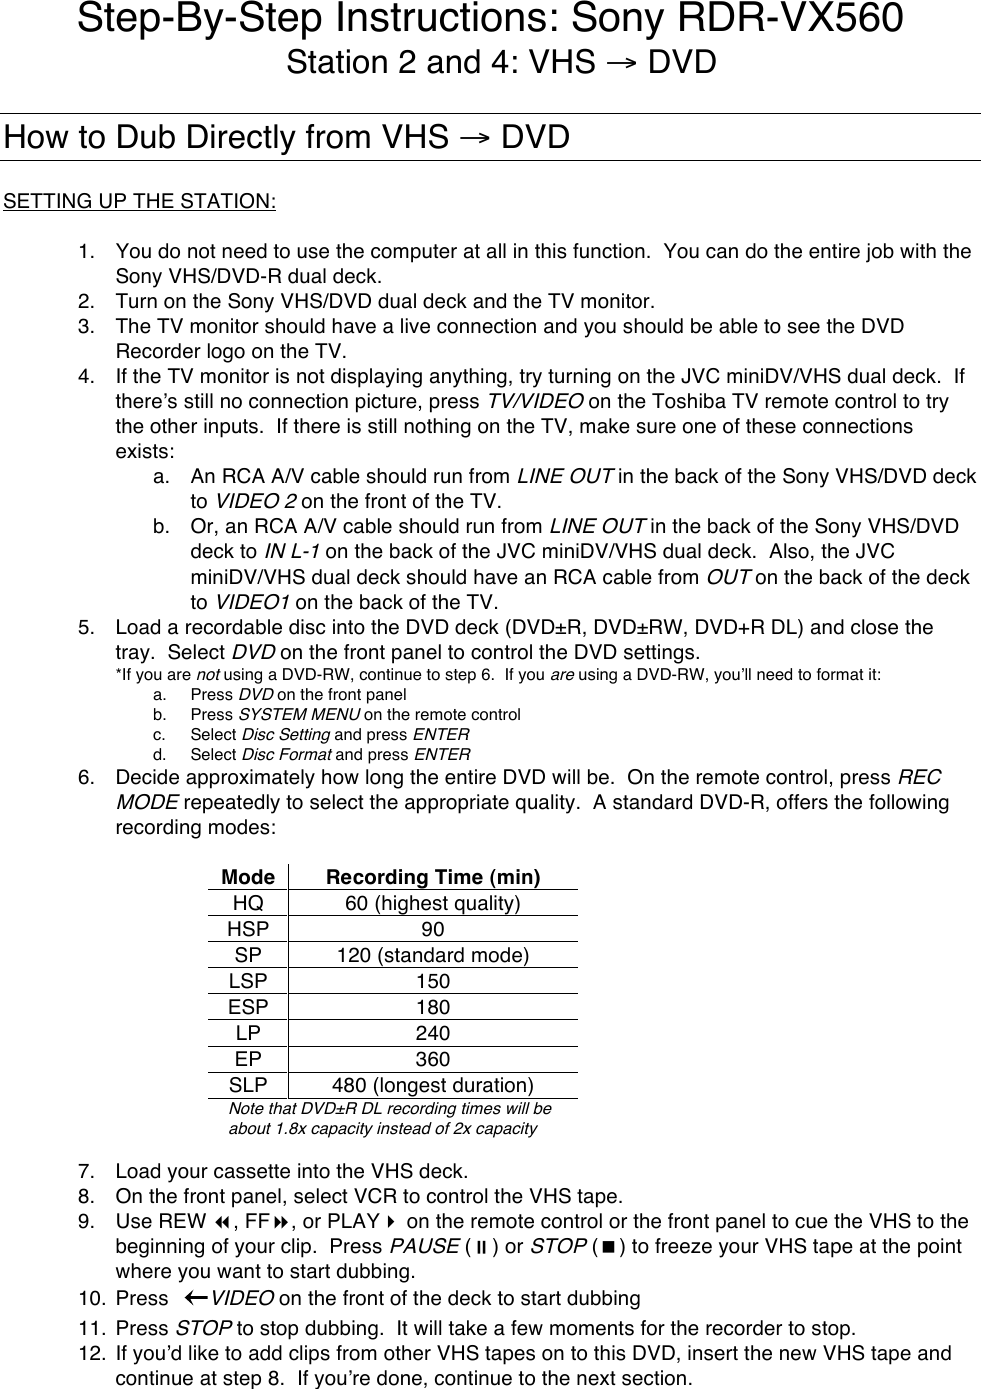 Page 1 of 2 - Sony Sony-Sony-Dvd-Recorder-Rdr-Vx560-Users-Manual Station_4_VHS_to_DVD